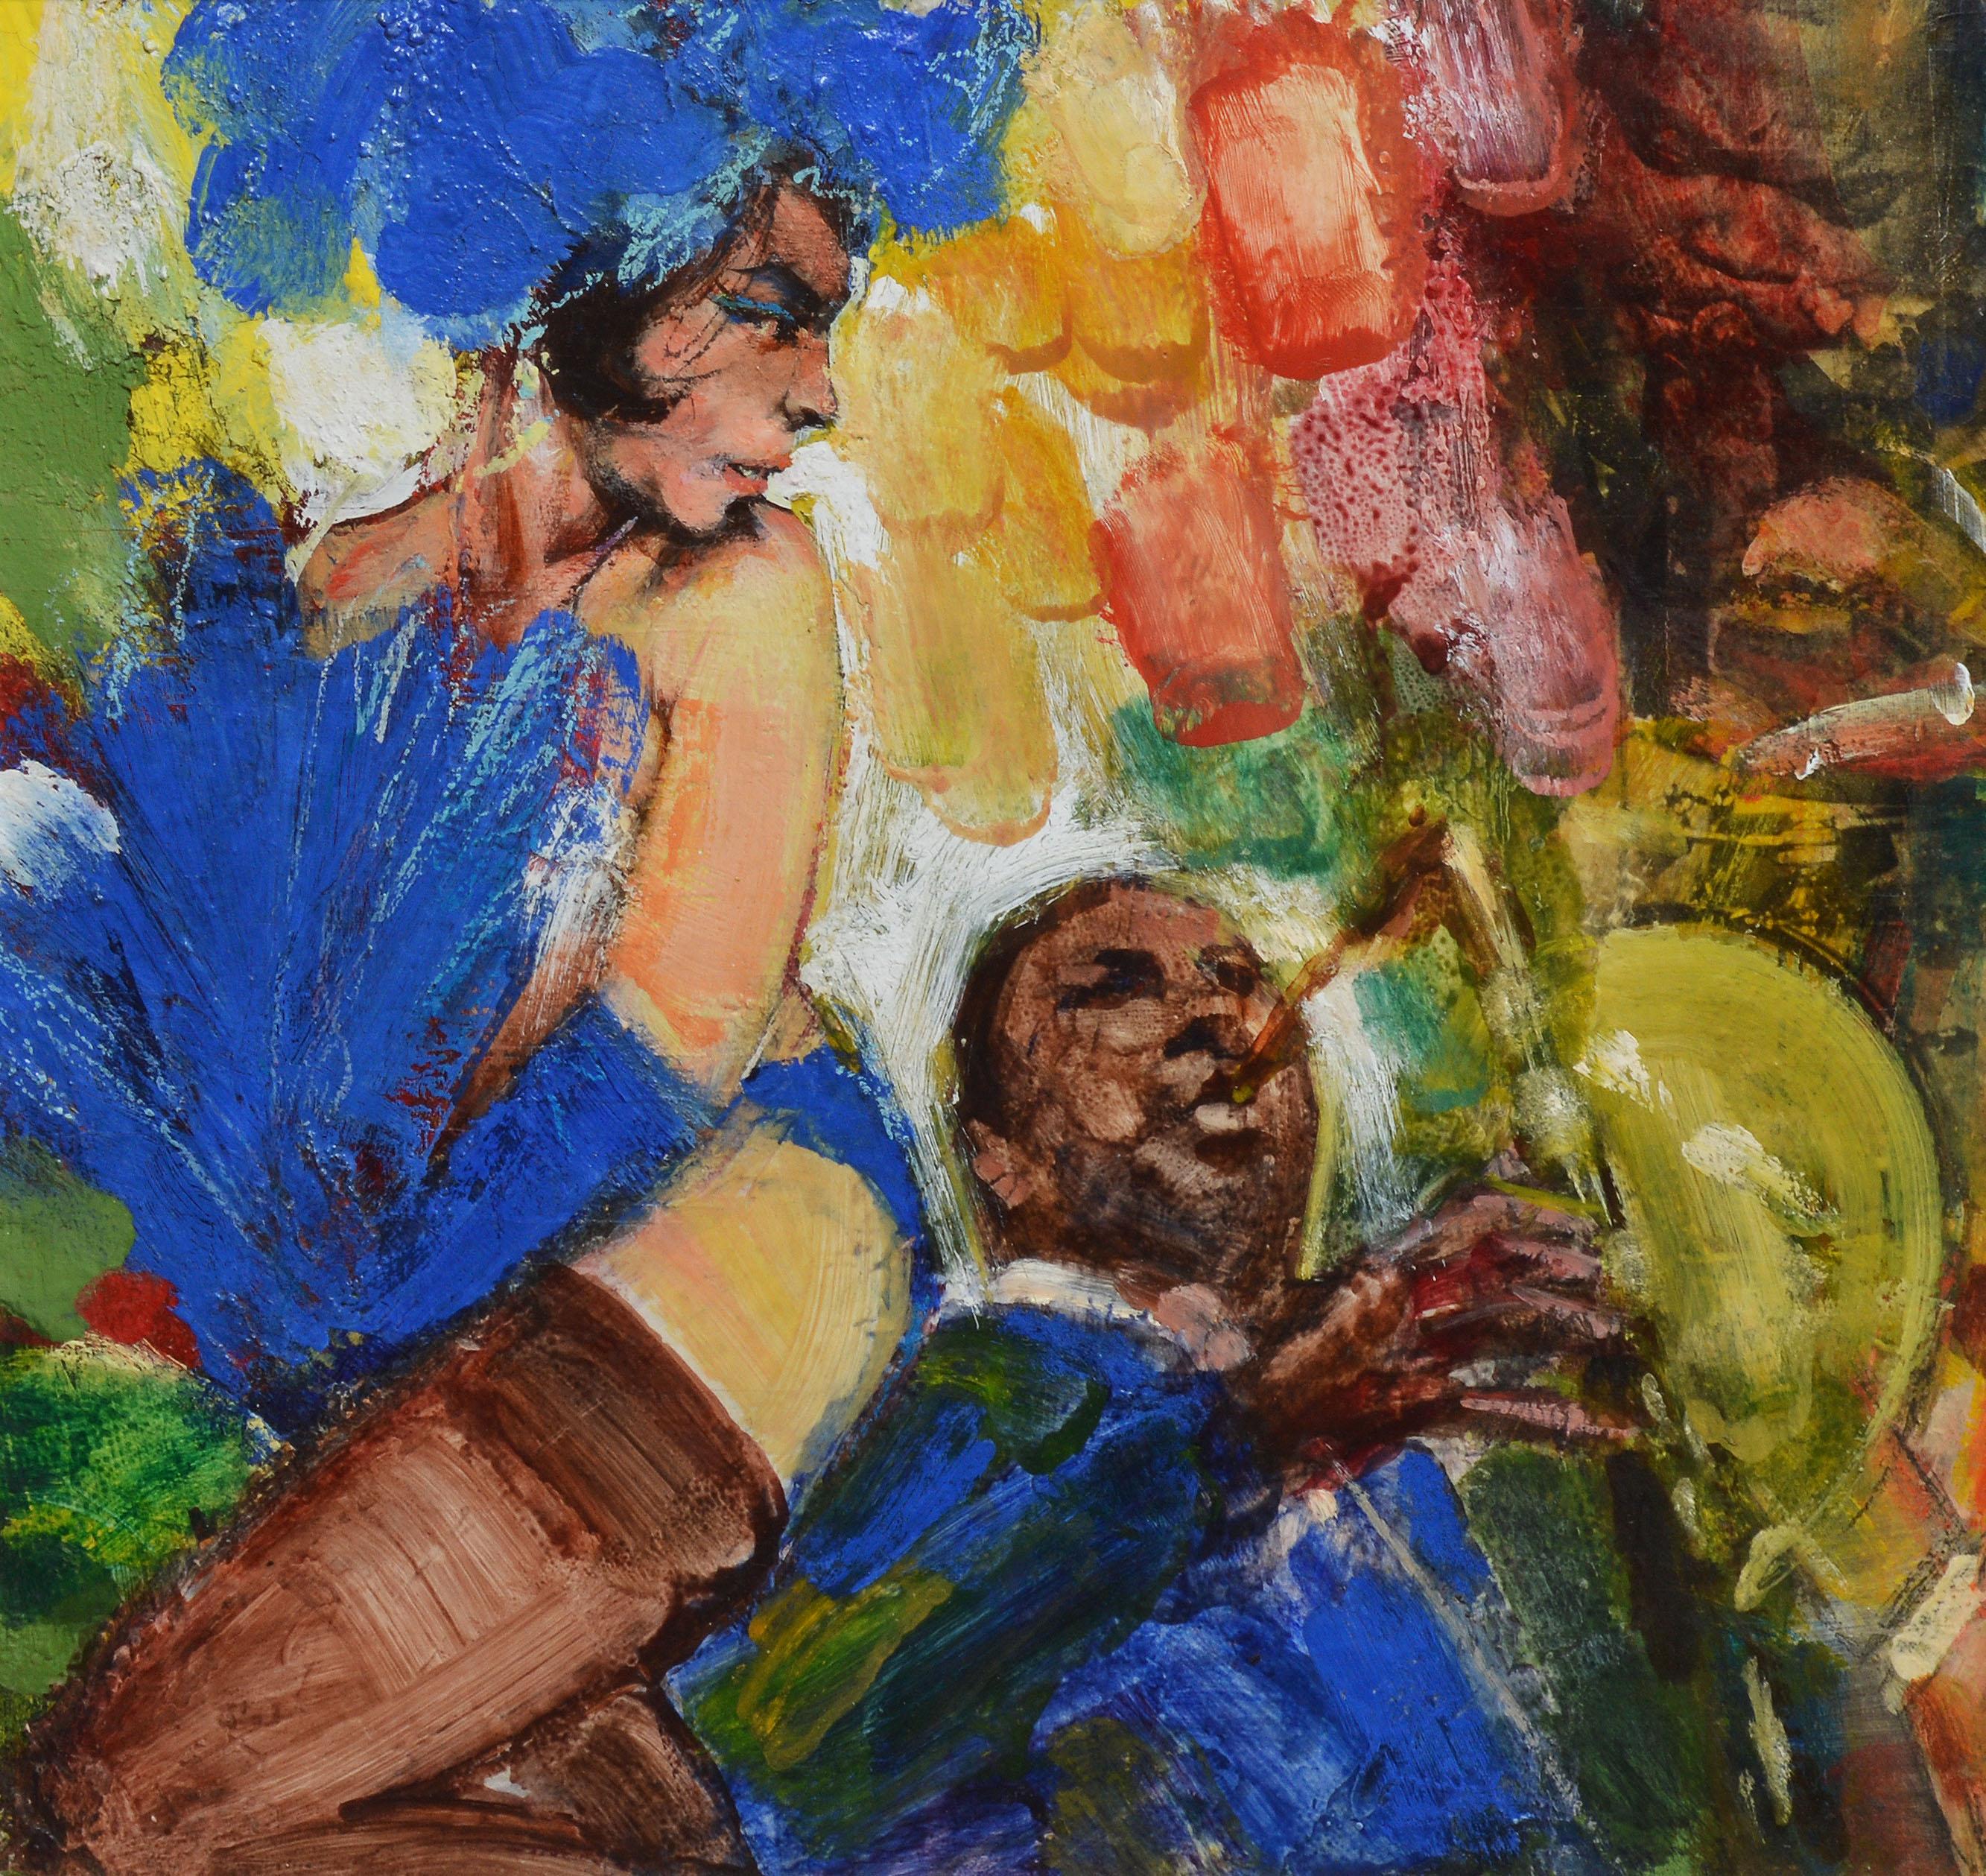 Modernist view of a Mardi Gras party in New Orleans by Walter Moskow  (1931 - 2013).  Oil on board, circa 1960.  Signed.  Displayed in a period frame.  Image size, 20